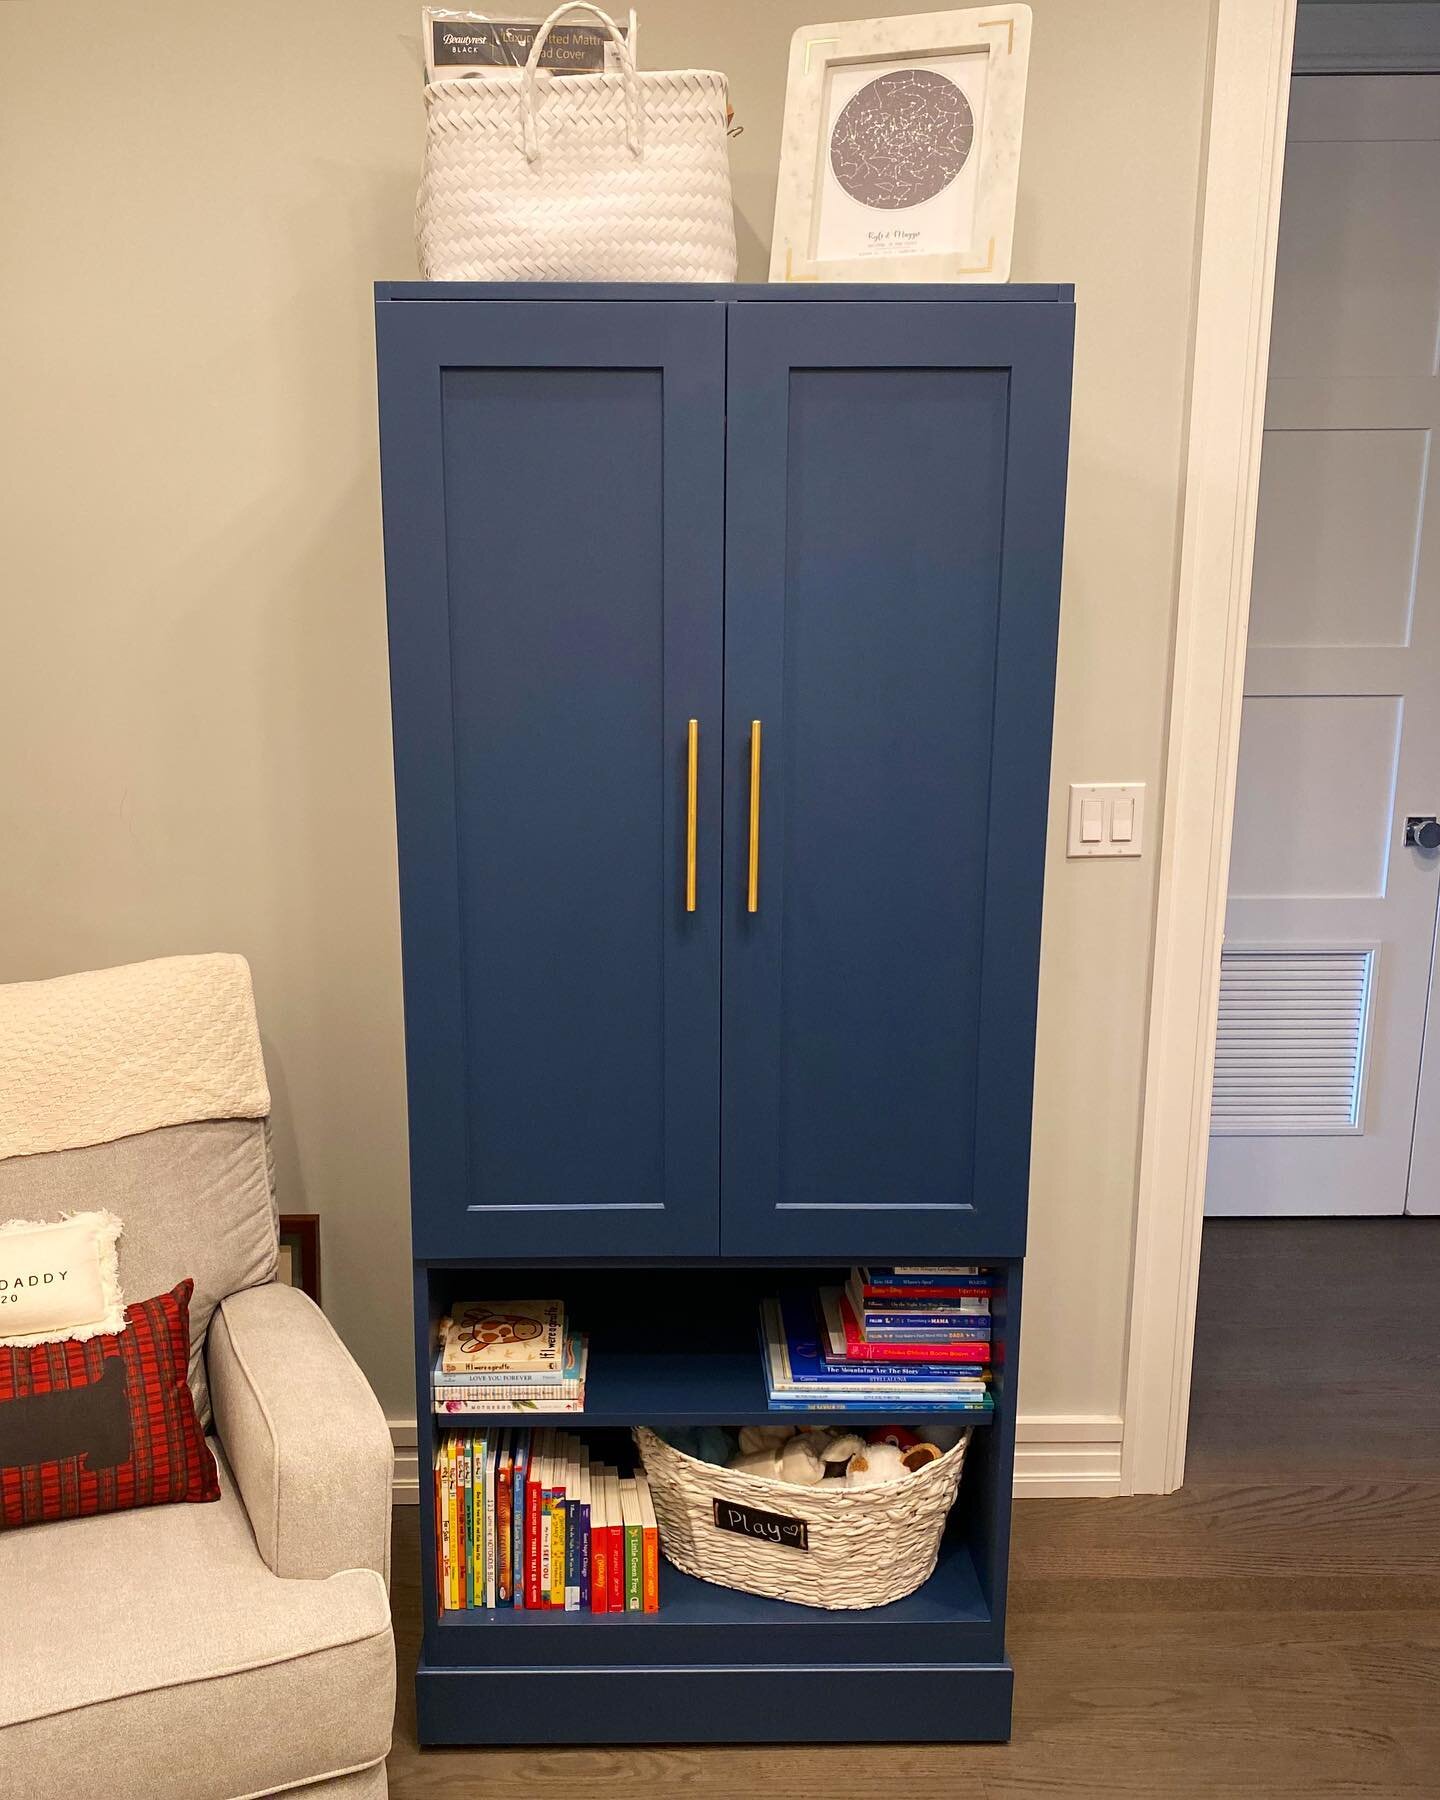 This custom wardrobe has a special place in our hearts. It was commissioned by family members / first-time parents for their baby&rsquo;s nursery, and we couldn&rsquo;t be happier that we were able to bring their vision to life. It warms our dusty, s